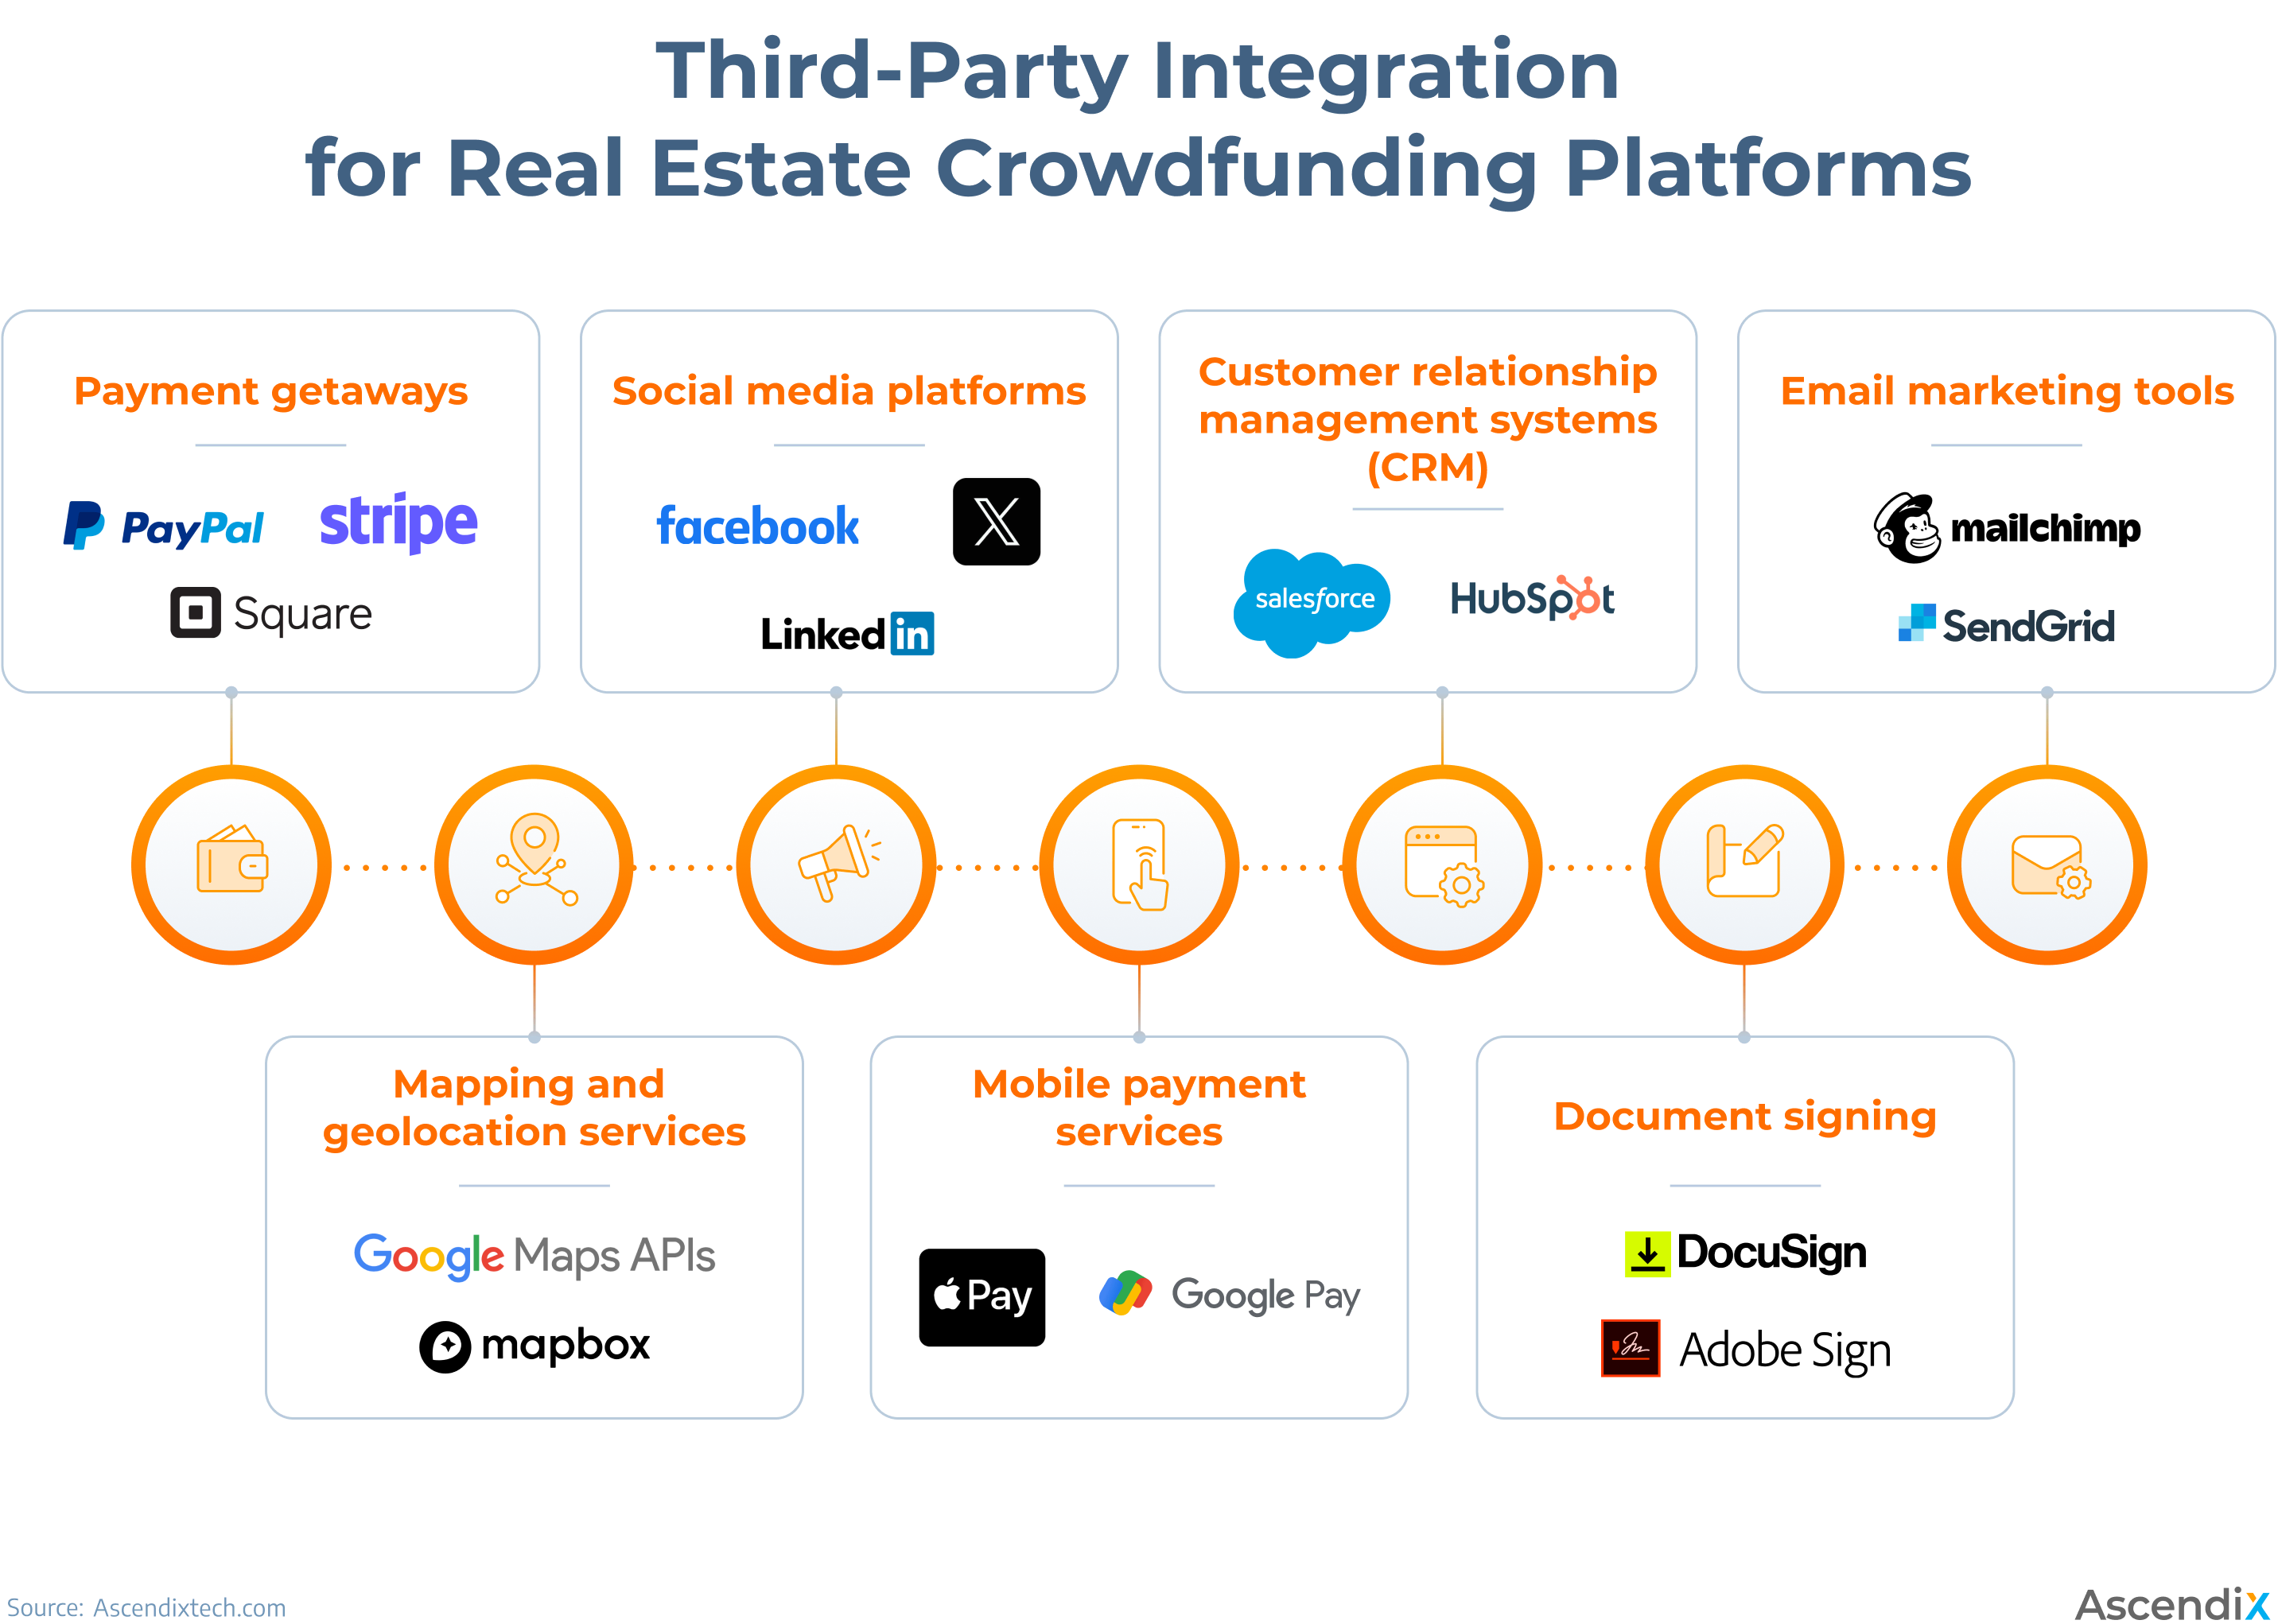 Third-Party Integration for Real Estate Crowdfunding Platforms